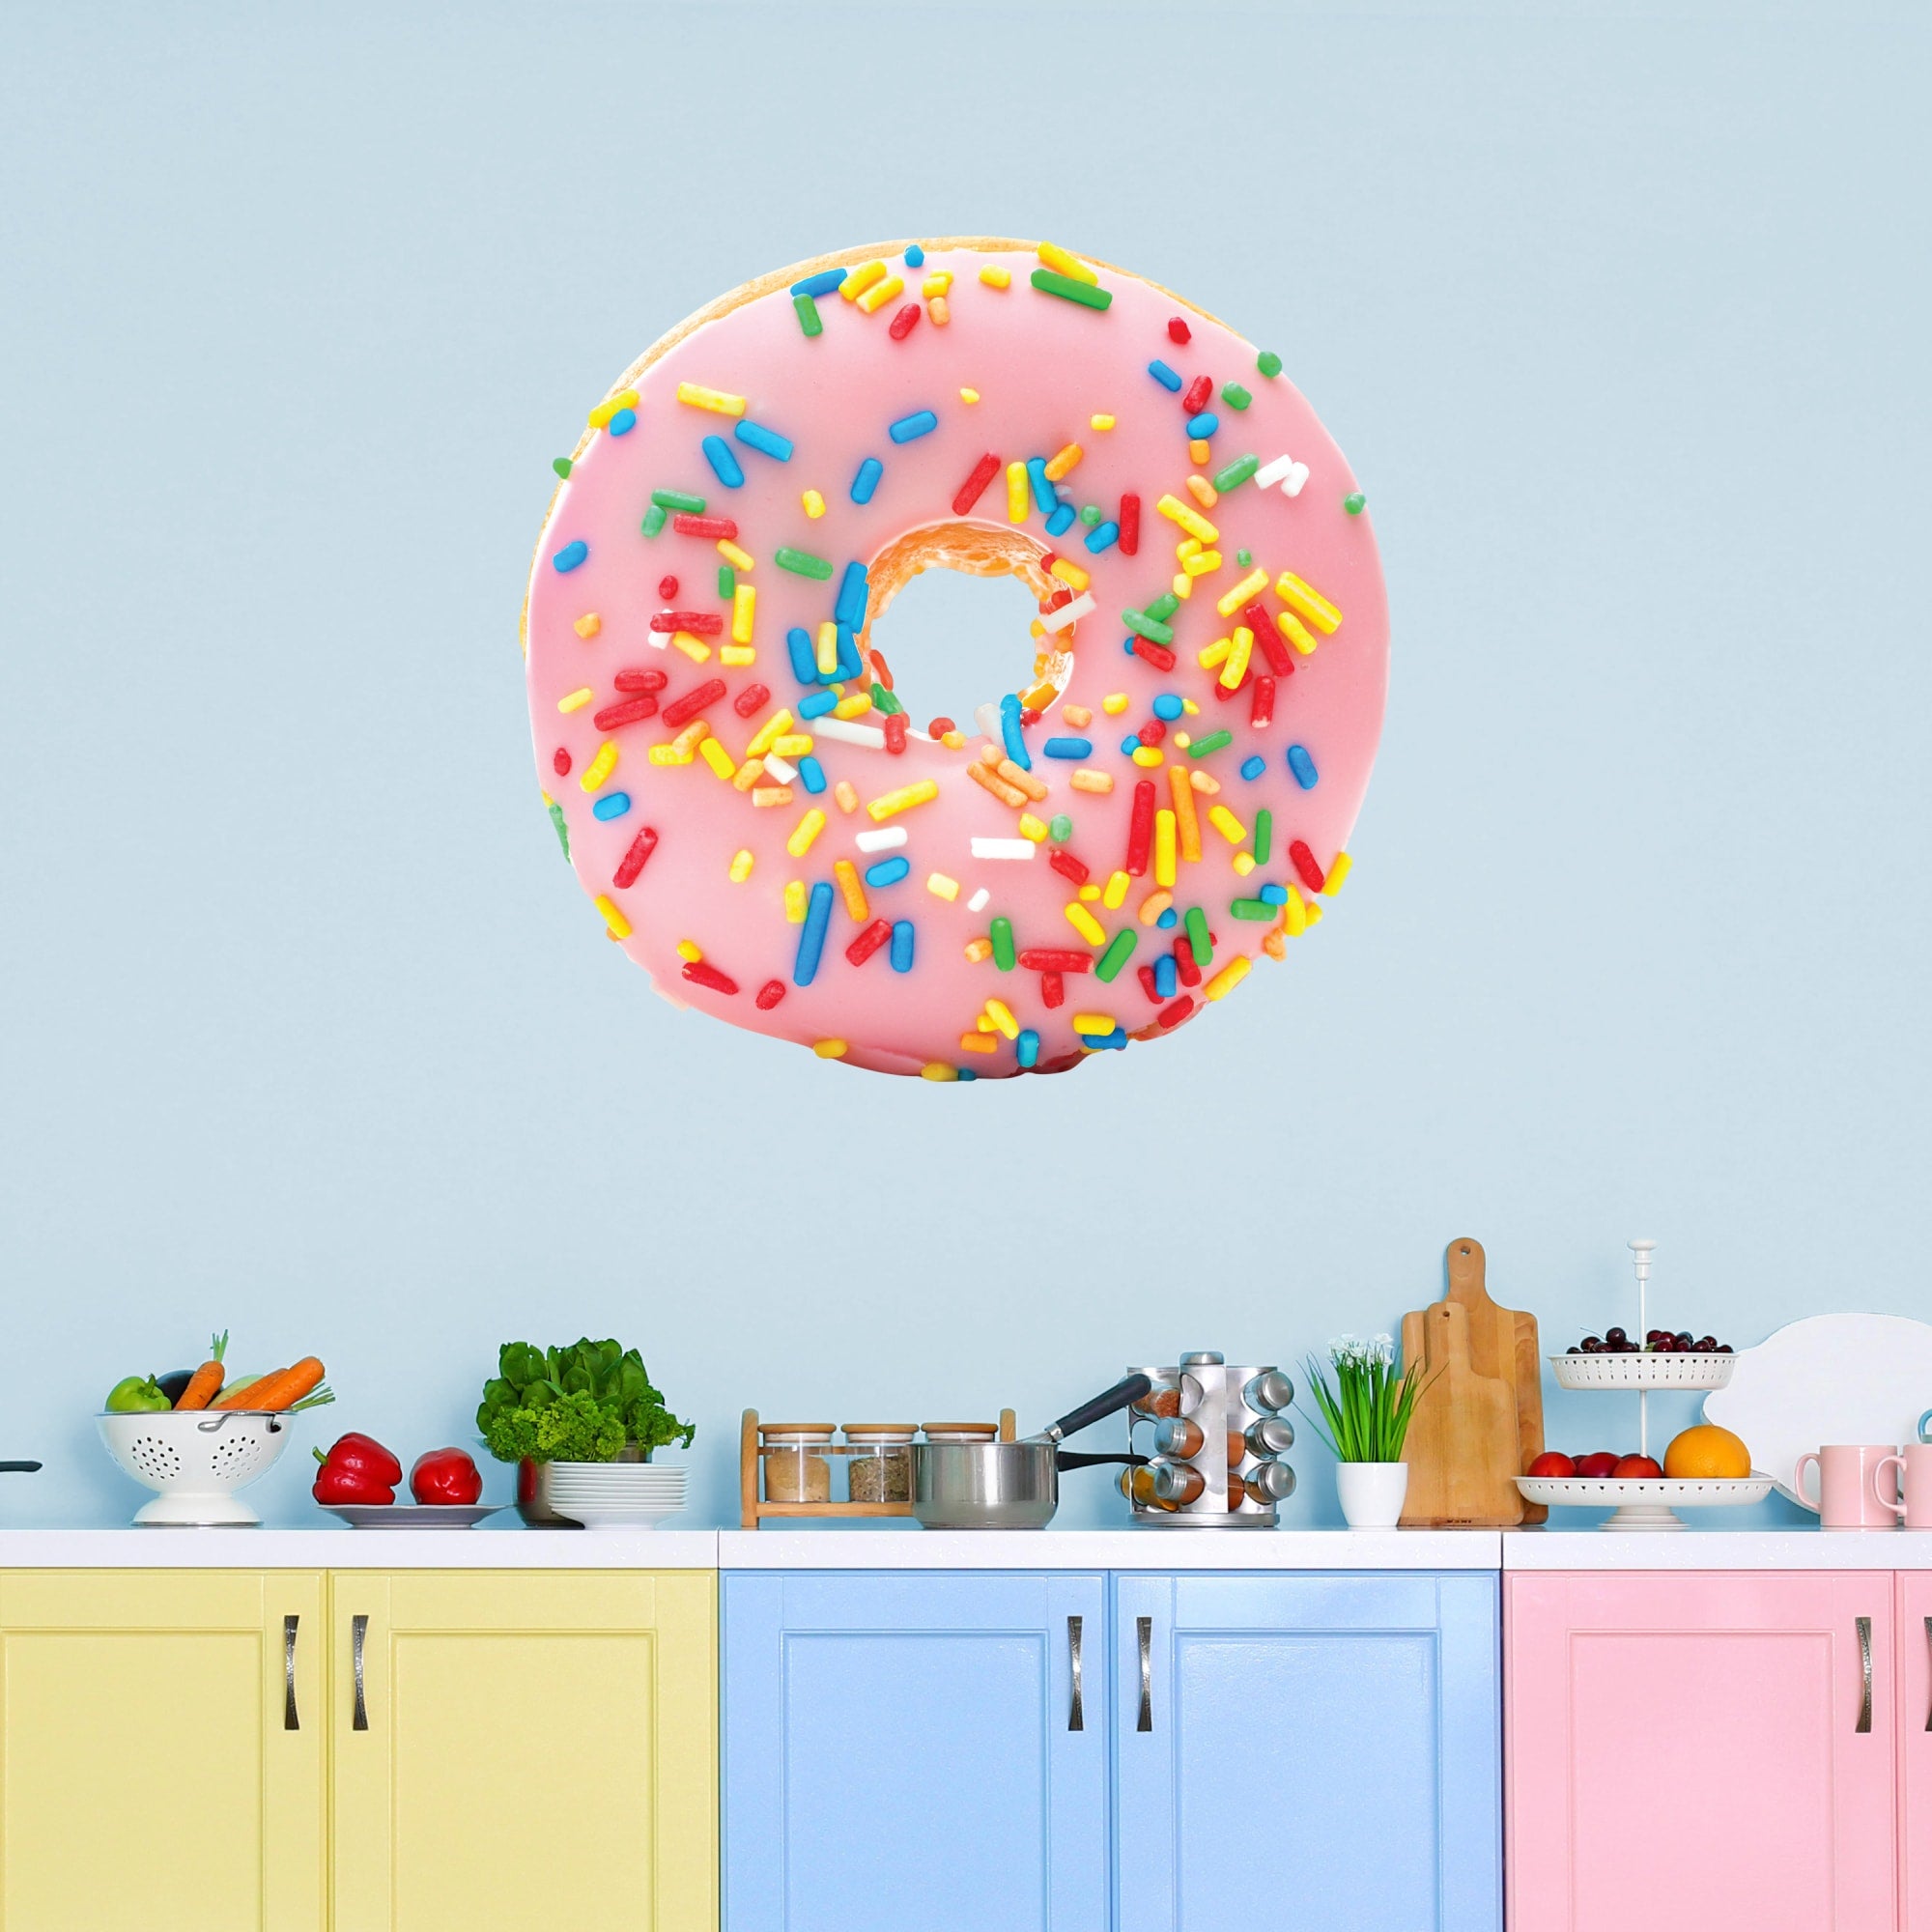 Donut - Removable Vinyl Decal Giant Donut + 2 Decals (38"W x 37"H) by Fathead